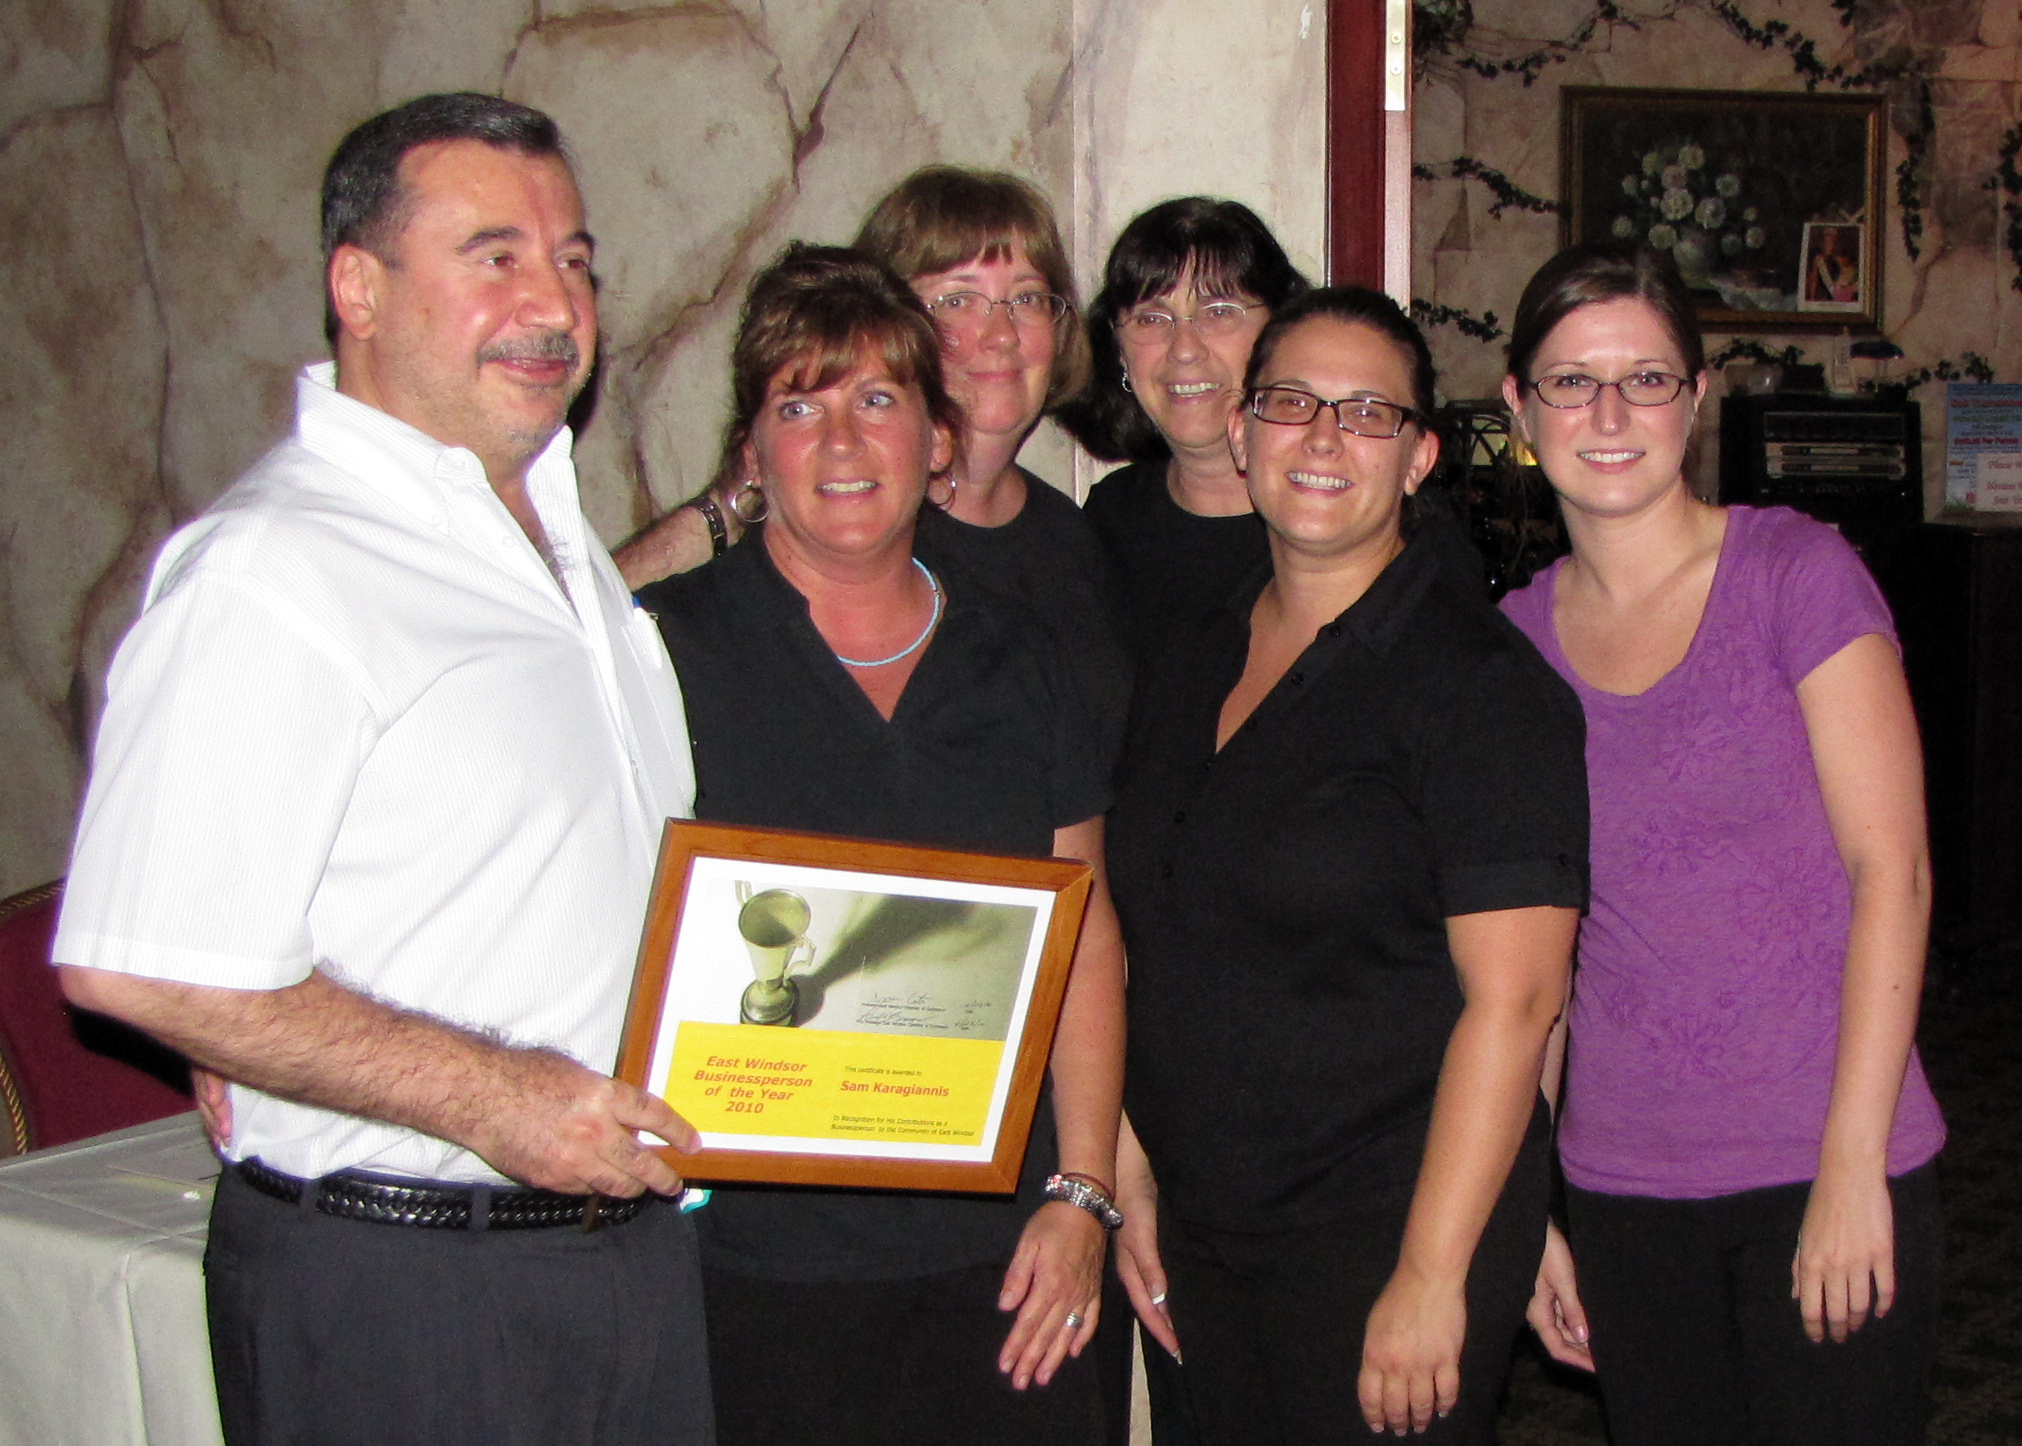 2010 Business Person of the Year Sammy Karagiannis & Staff of La Notte